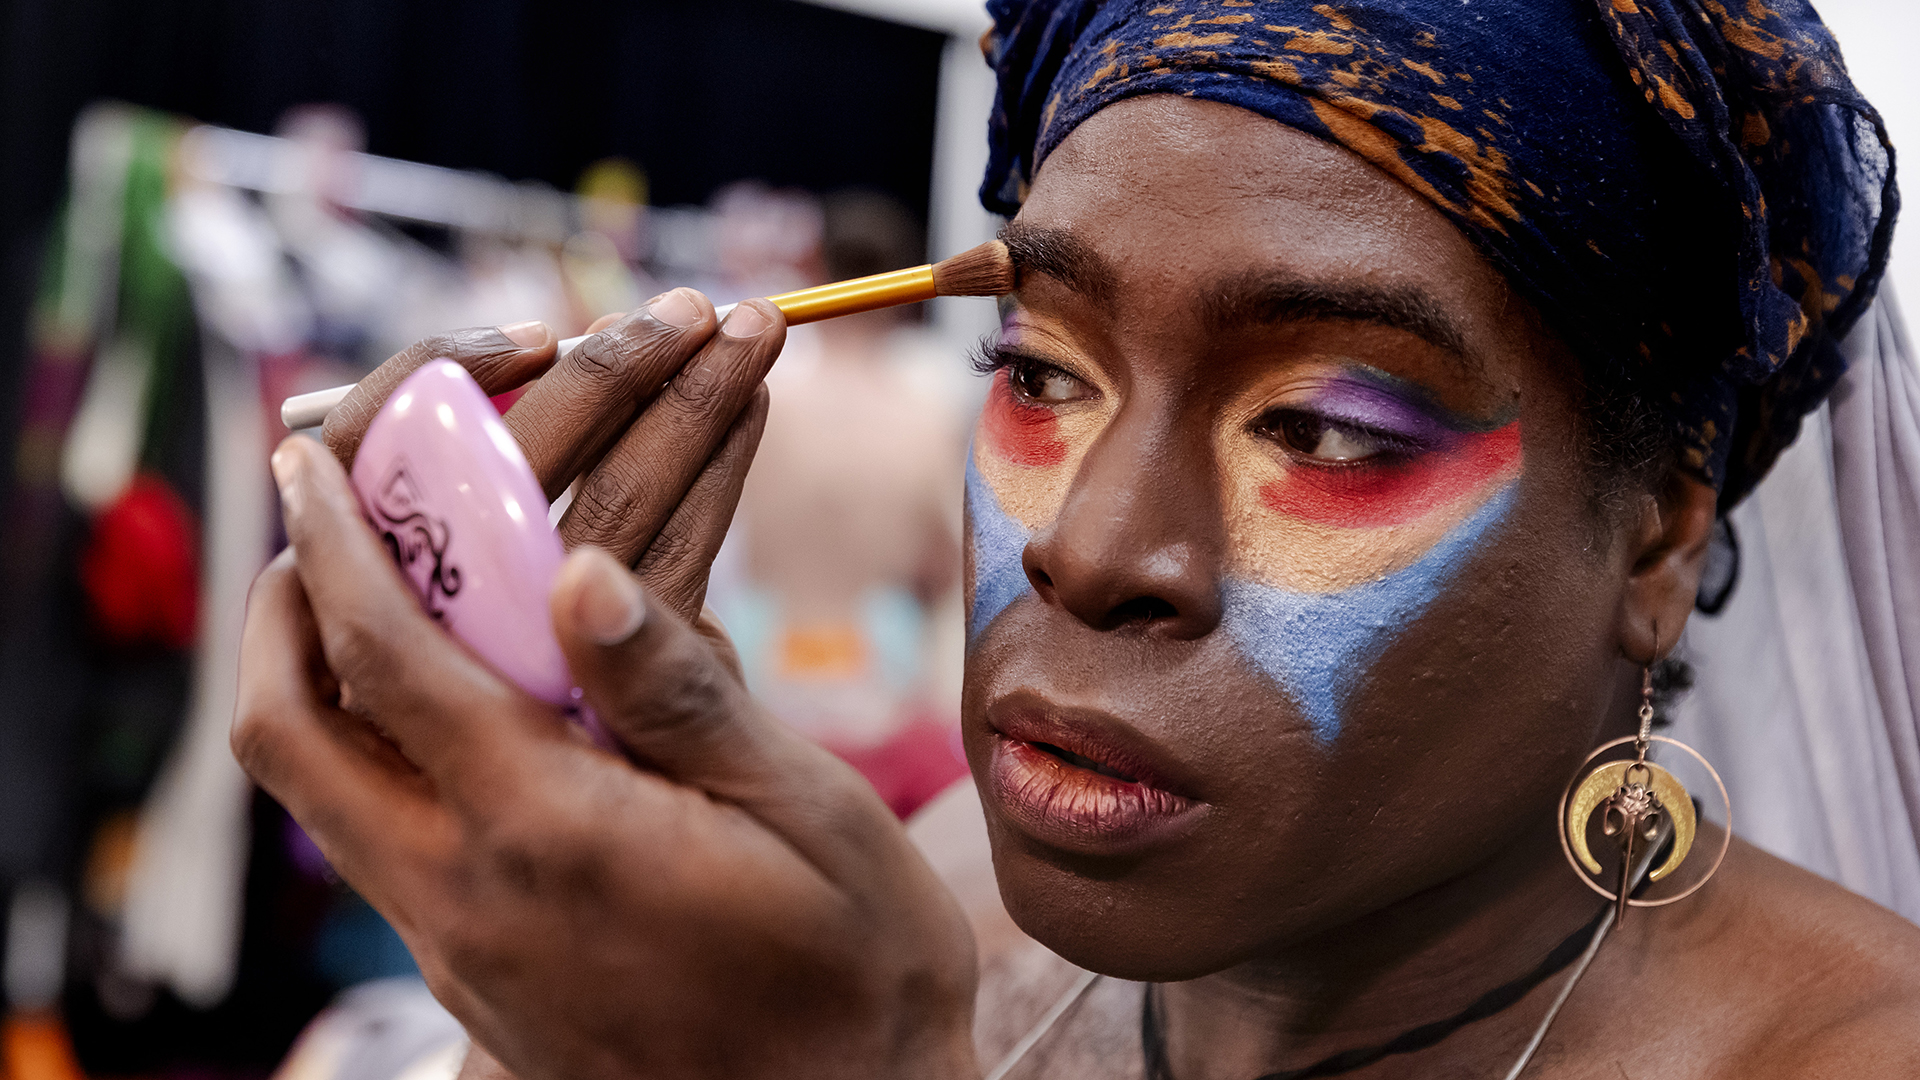 A closeup of a performer's face as they apply colorful makeup around their eyes while looking into a small compact mirror